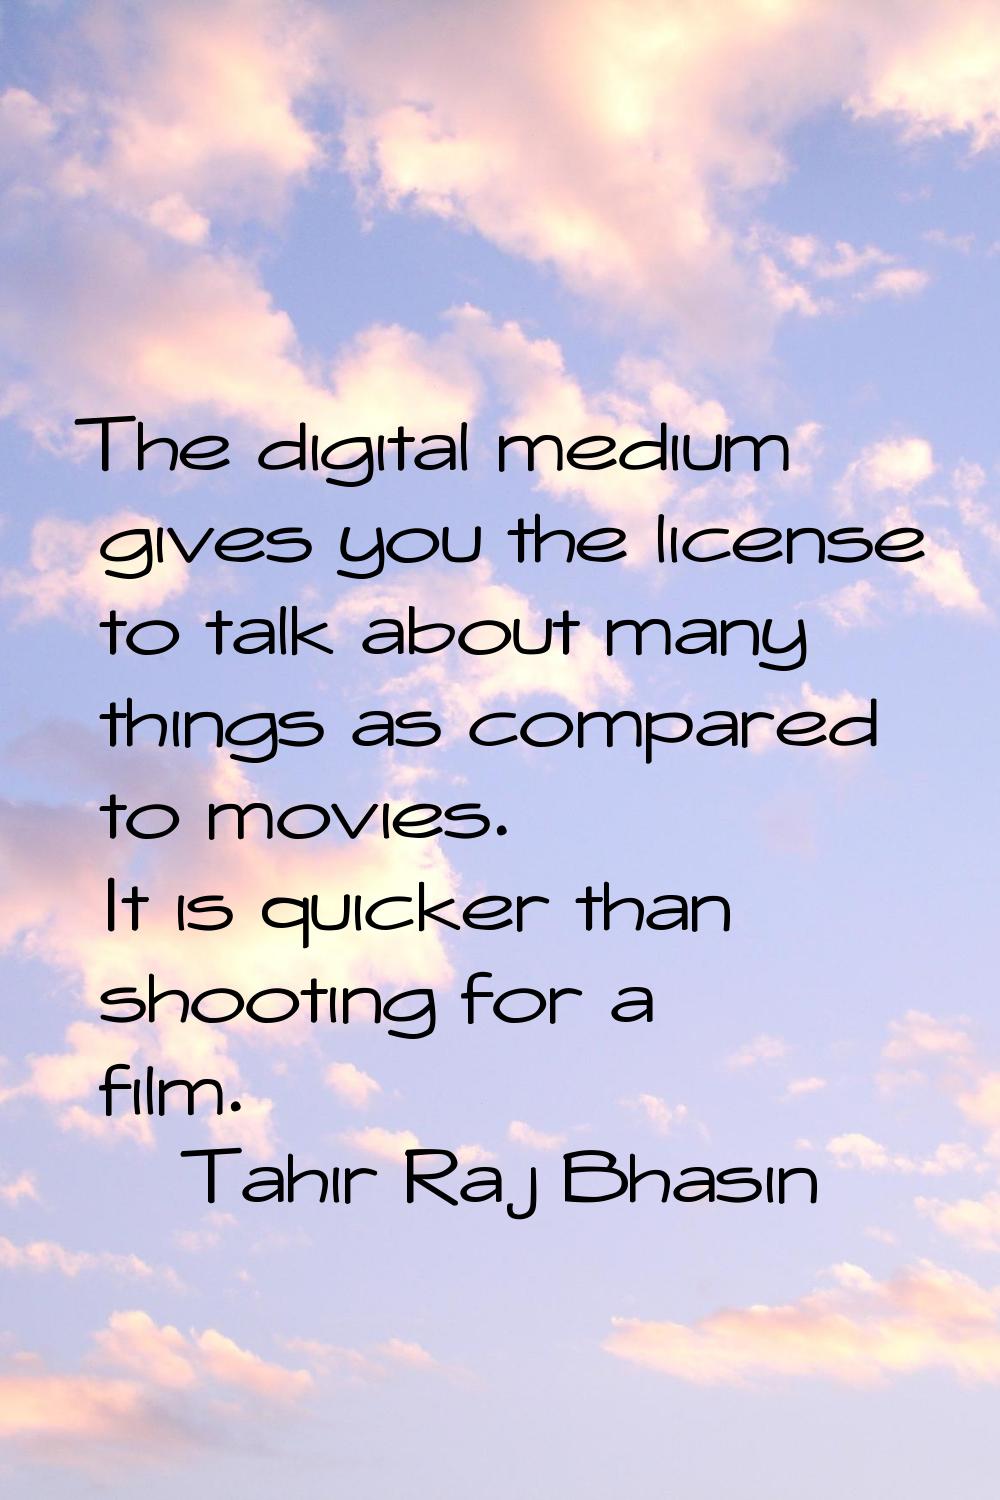 The digital medium gives you the license to talk about many things as compared to movies. It is qui